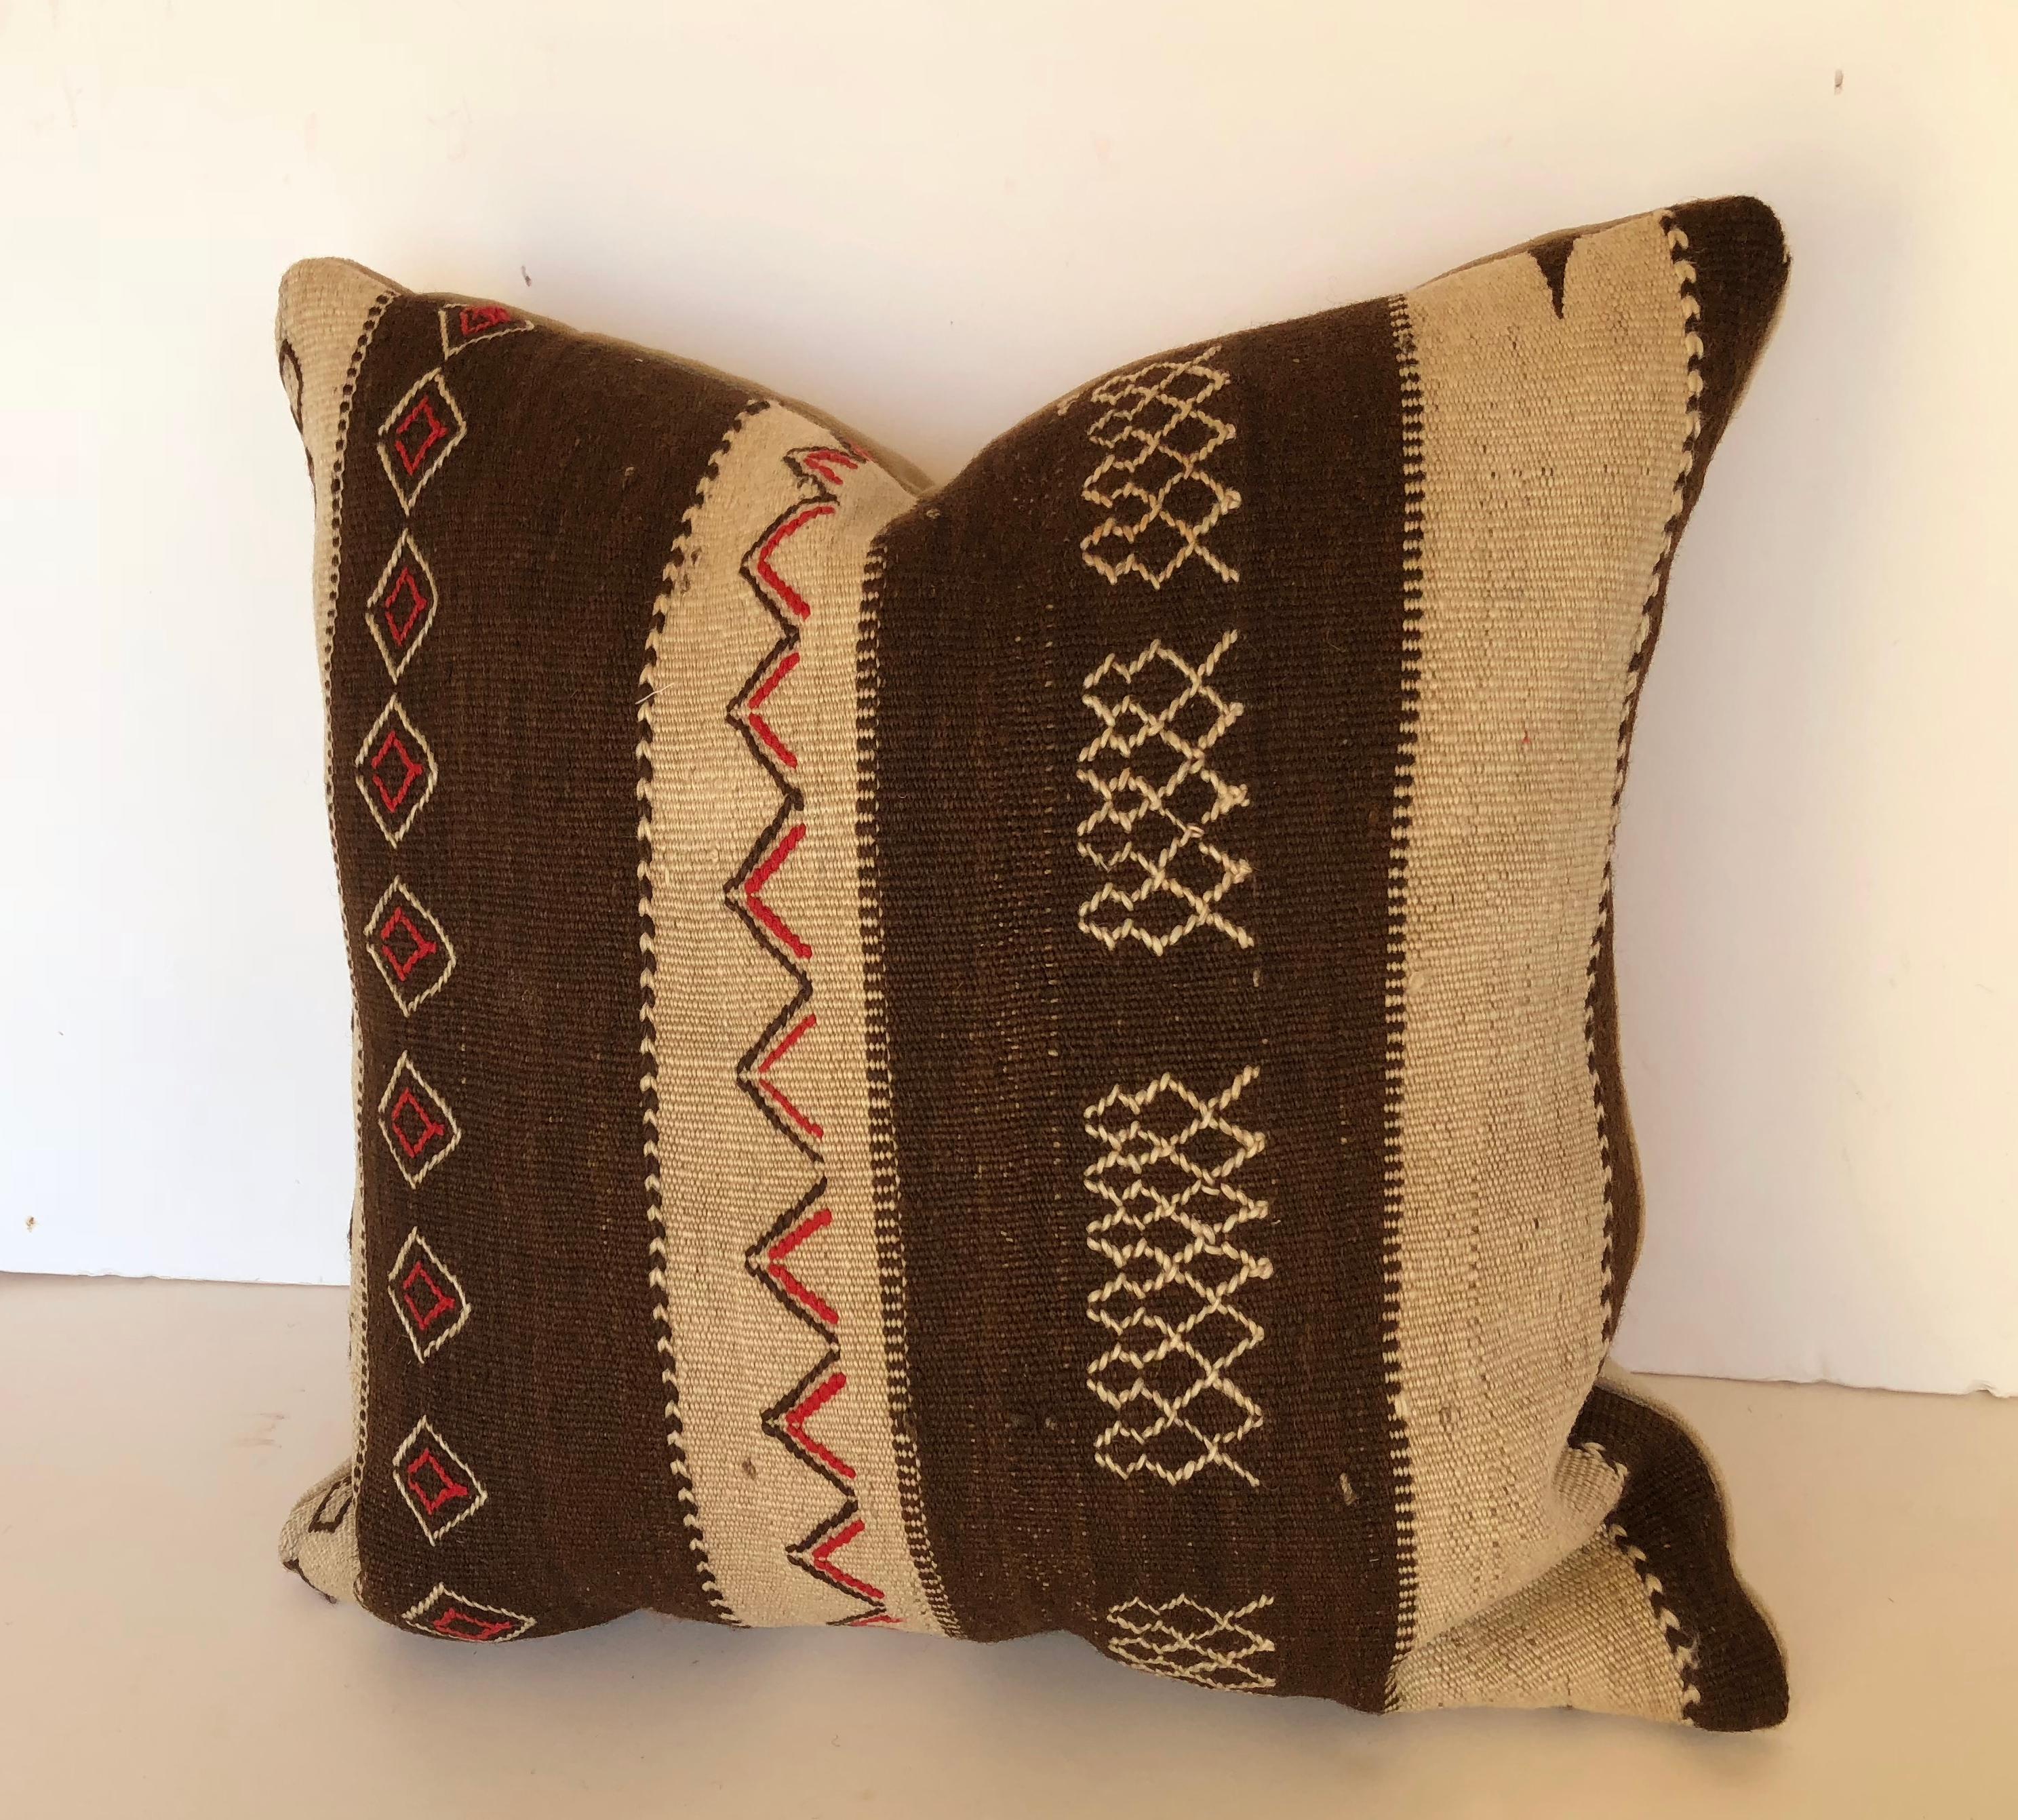 Custom pillow cut from a vintage Moroccan hand loomed wool Ourika rug made by the Berber tribes of the Upper Atlas Mountains. Wool is soft and lustrous with tribal embroidered designs. Pillow is backed in cream velvet, filled with an insert of 50/50